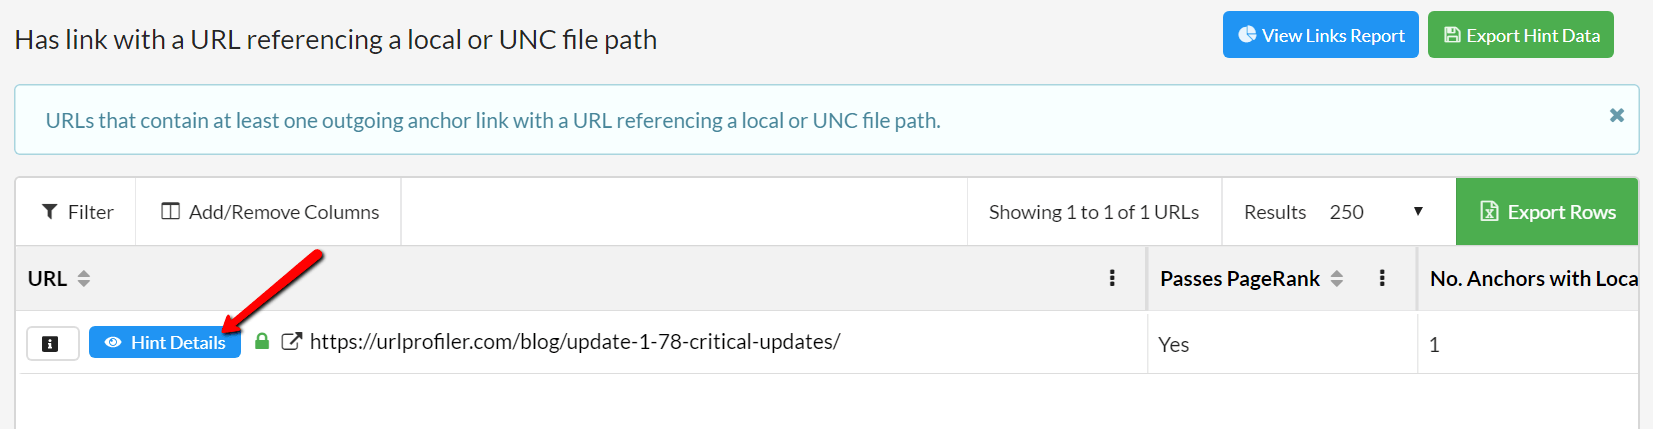 Has link referencing local file path